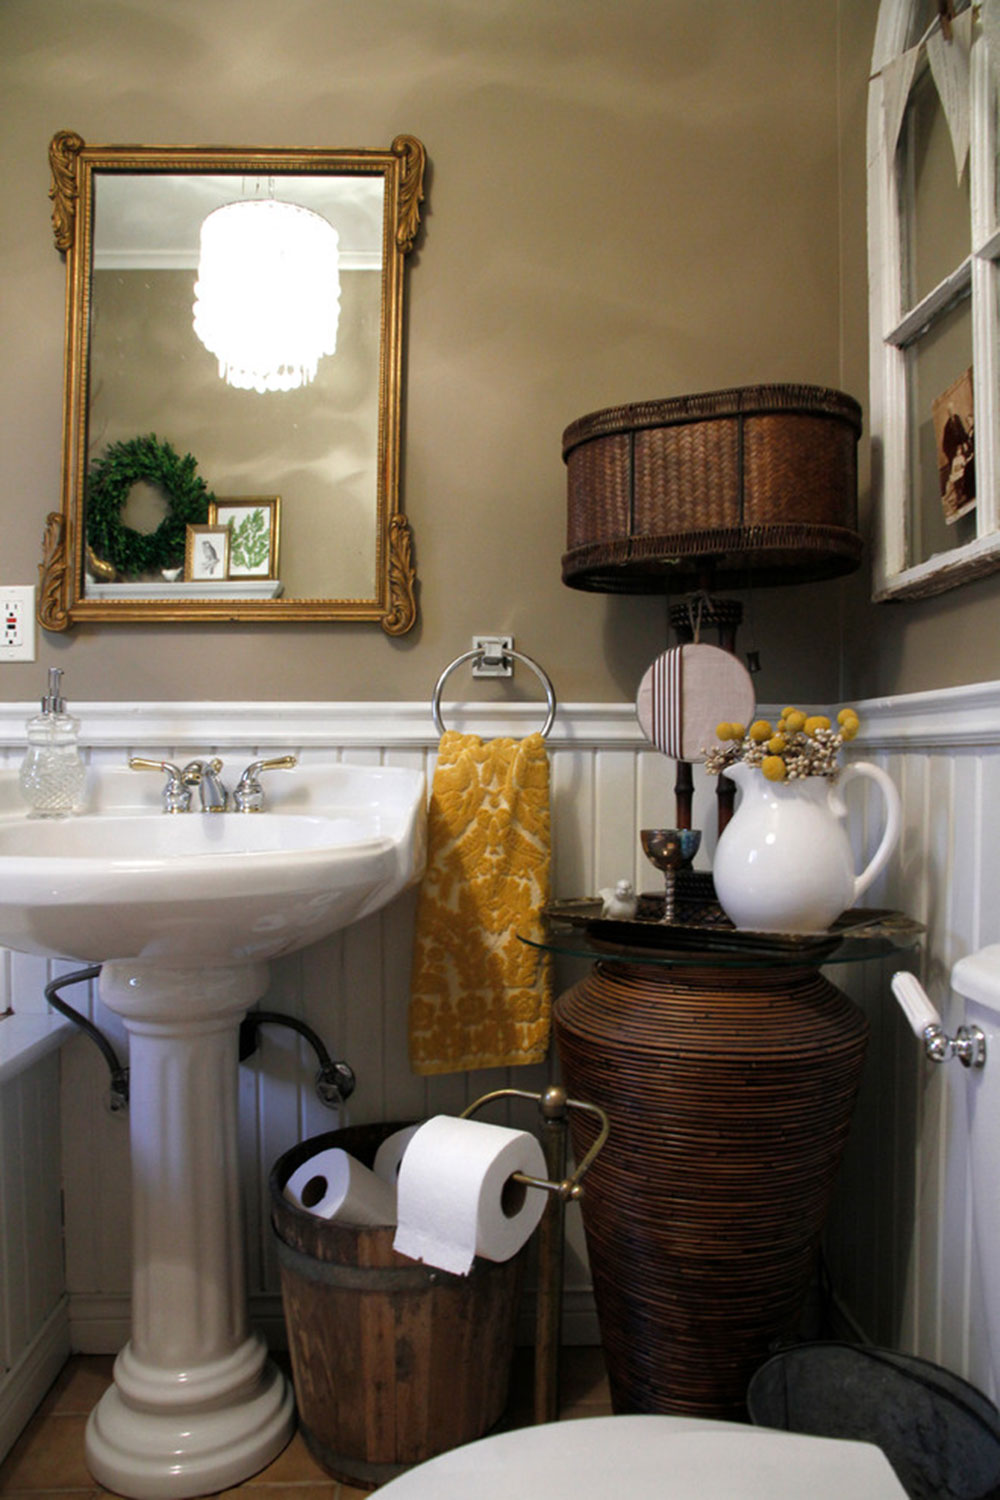 My-Houzz-Meaghan-and-Trevor-Welland-ON-by-Esther-Hershcovich Small bathroom shelf ideas to optimize your bathroom space